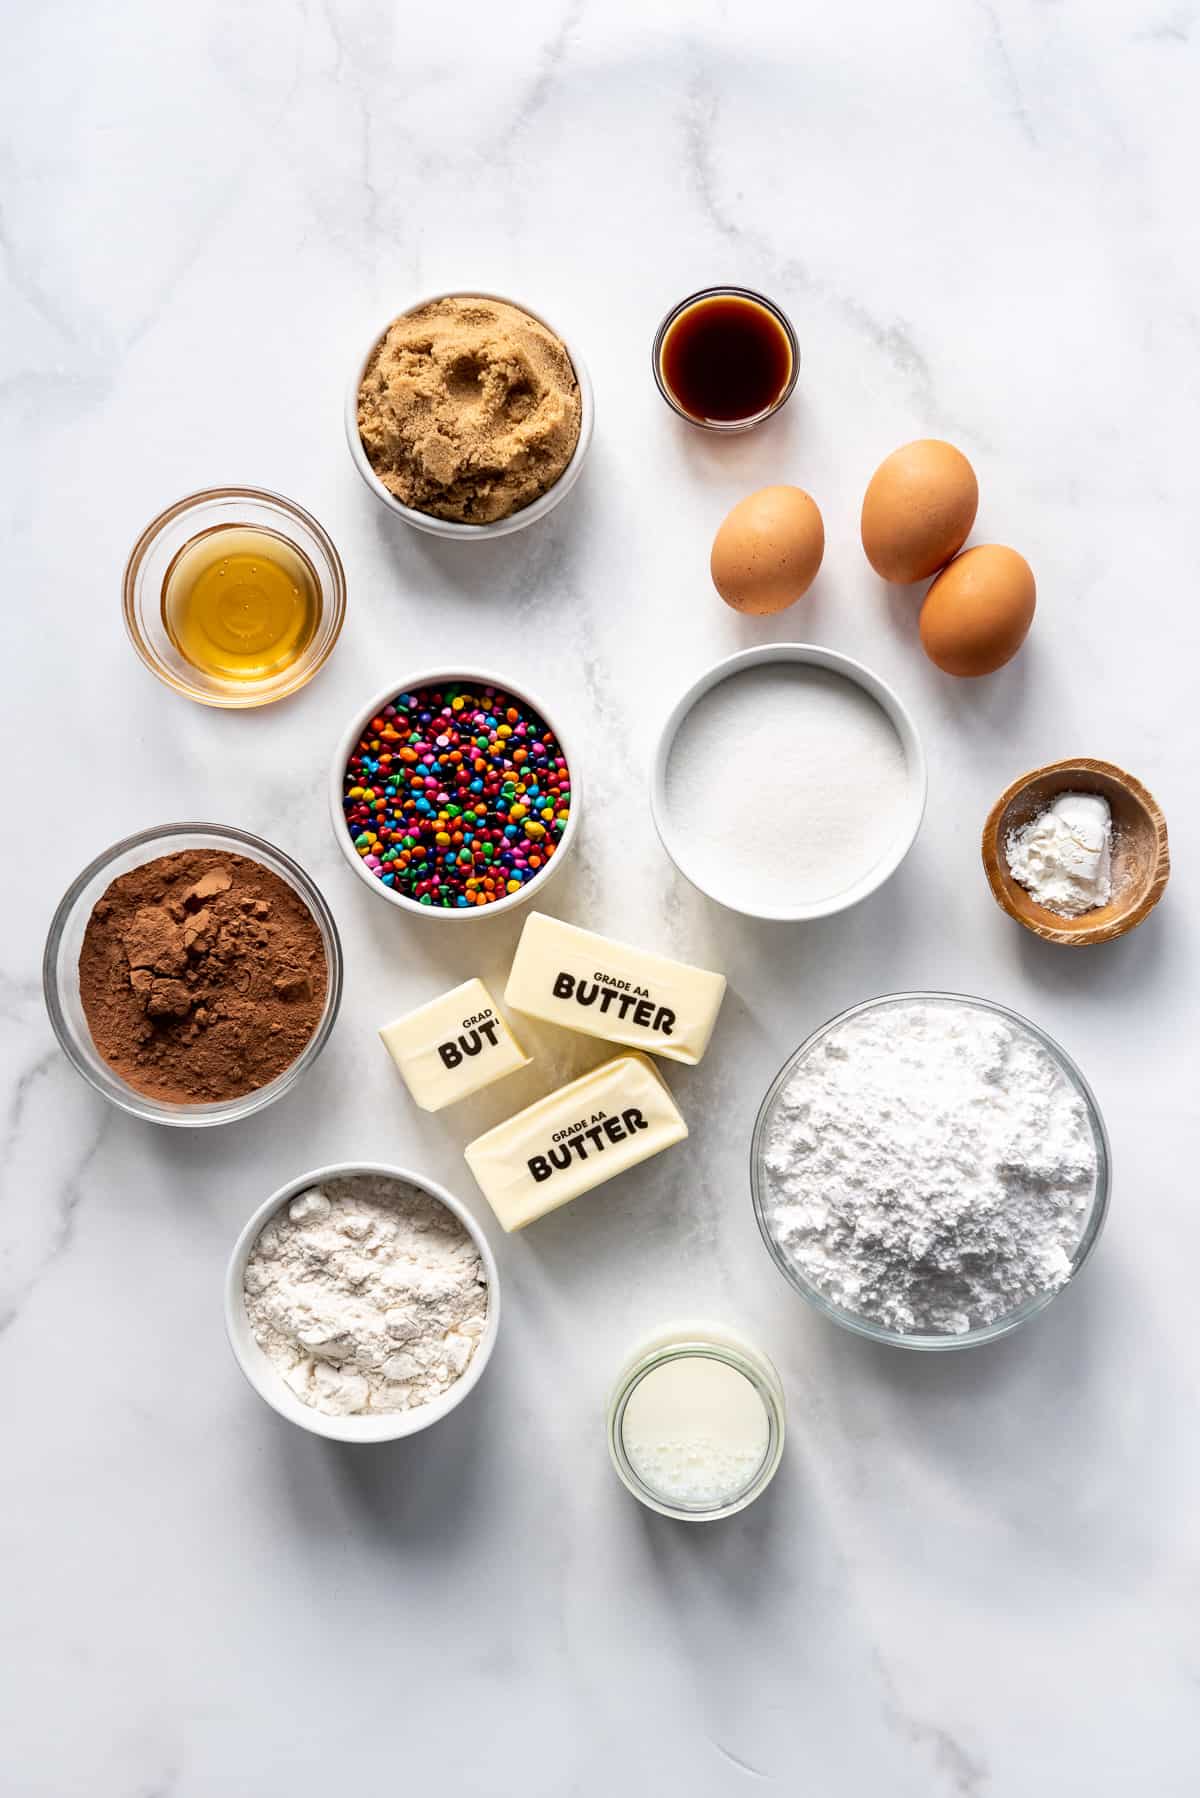 Ingredients for making homemade cosmic brownies in separate bowls on a white surface.